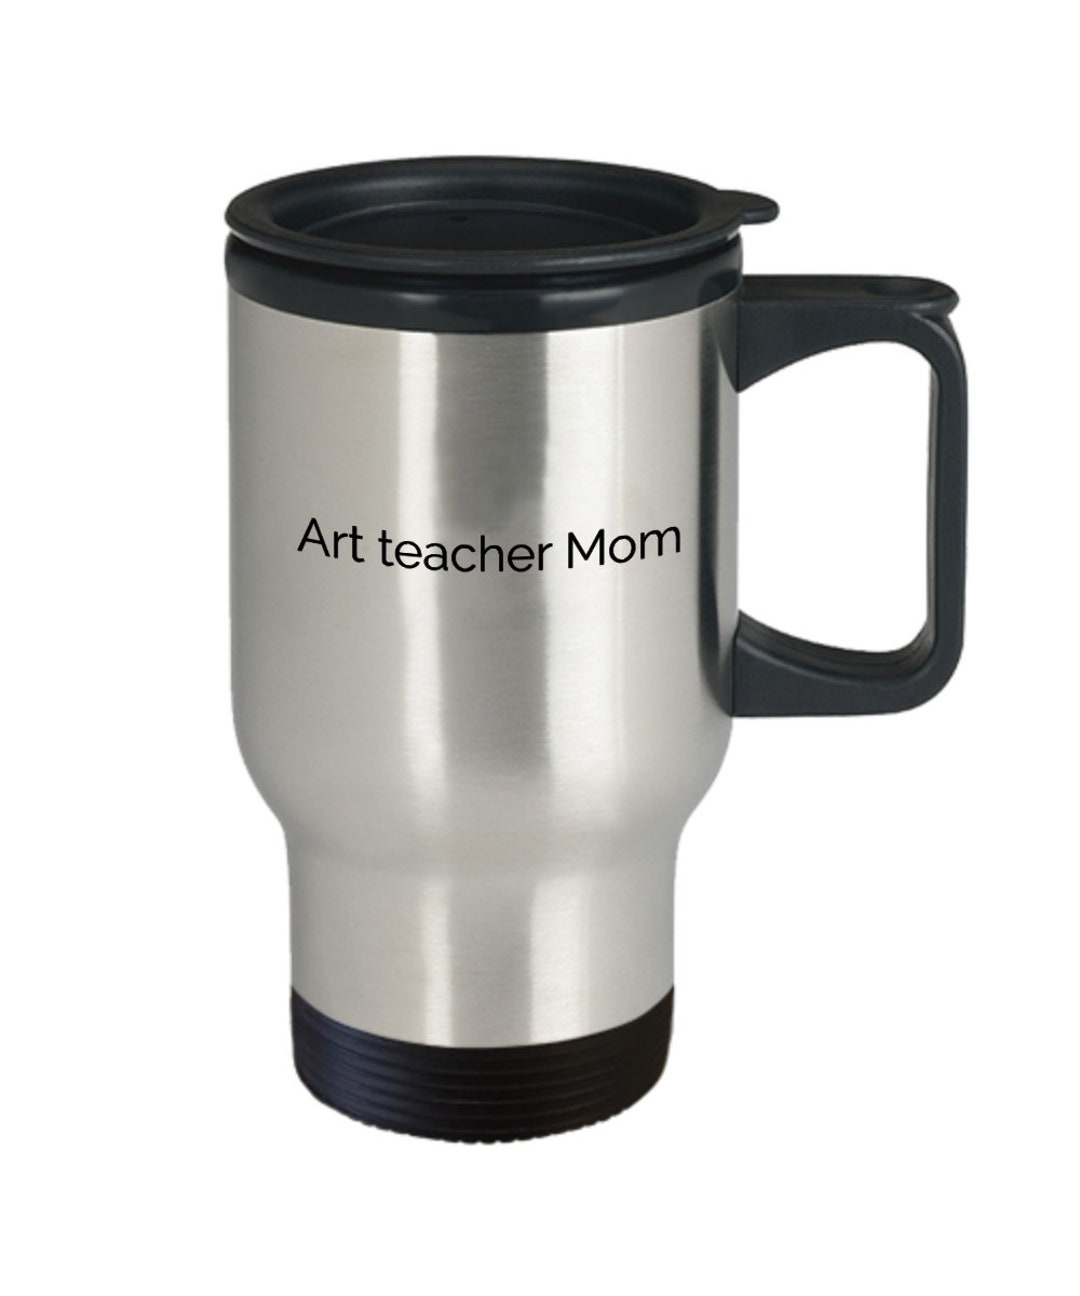 Artist Gifts for Women - Teacher Gifts for Women - Art Teacher Gifts for  Her Him - Funny Birthday Gifts for Painting Lovers - Stainless Steel Coffee